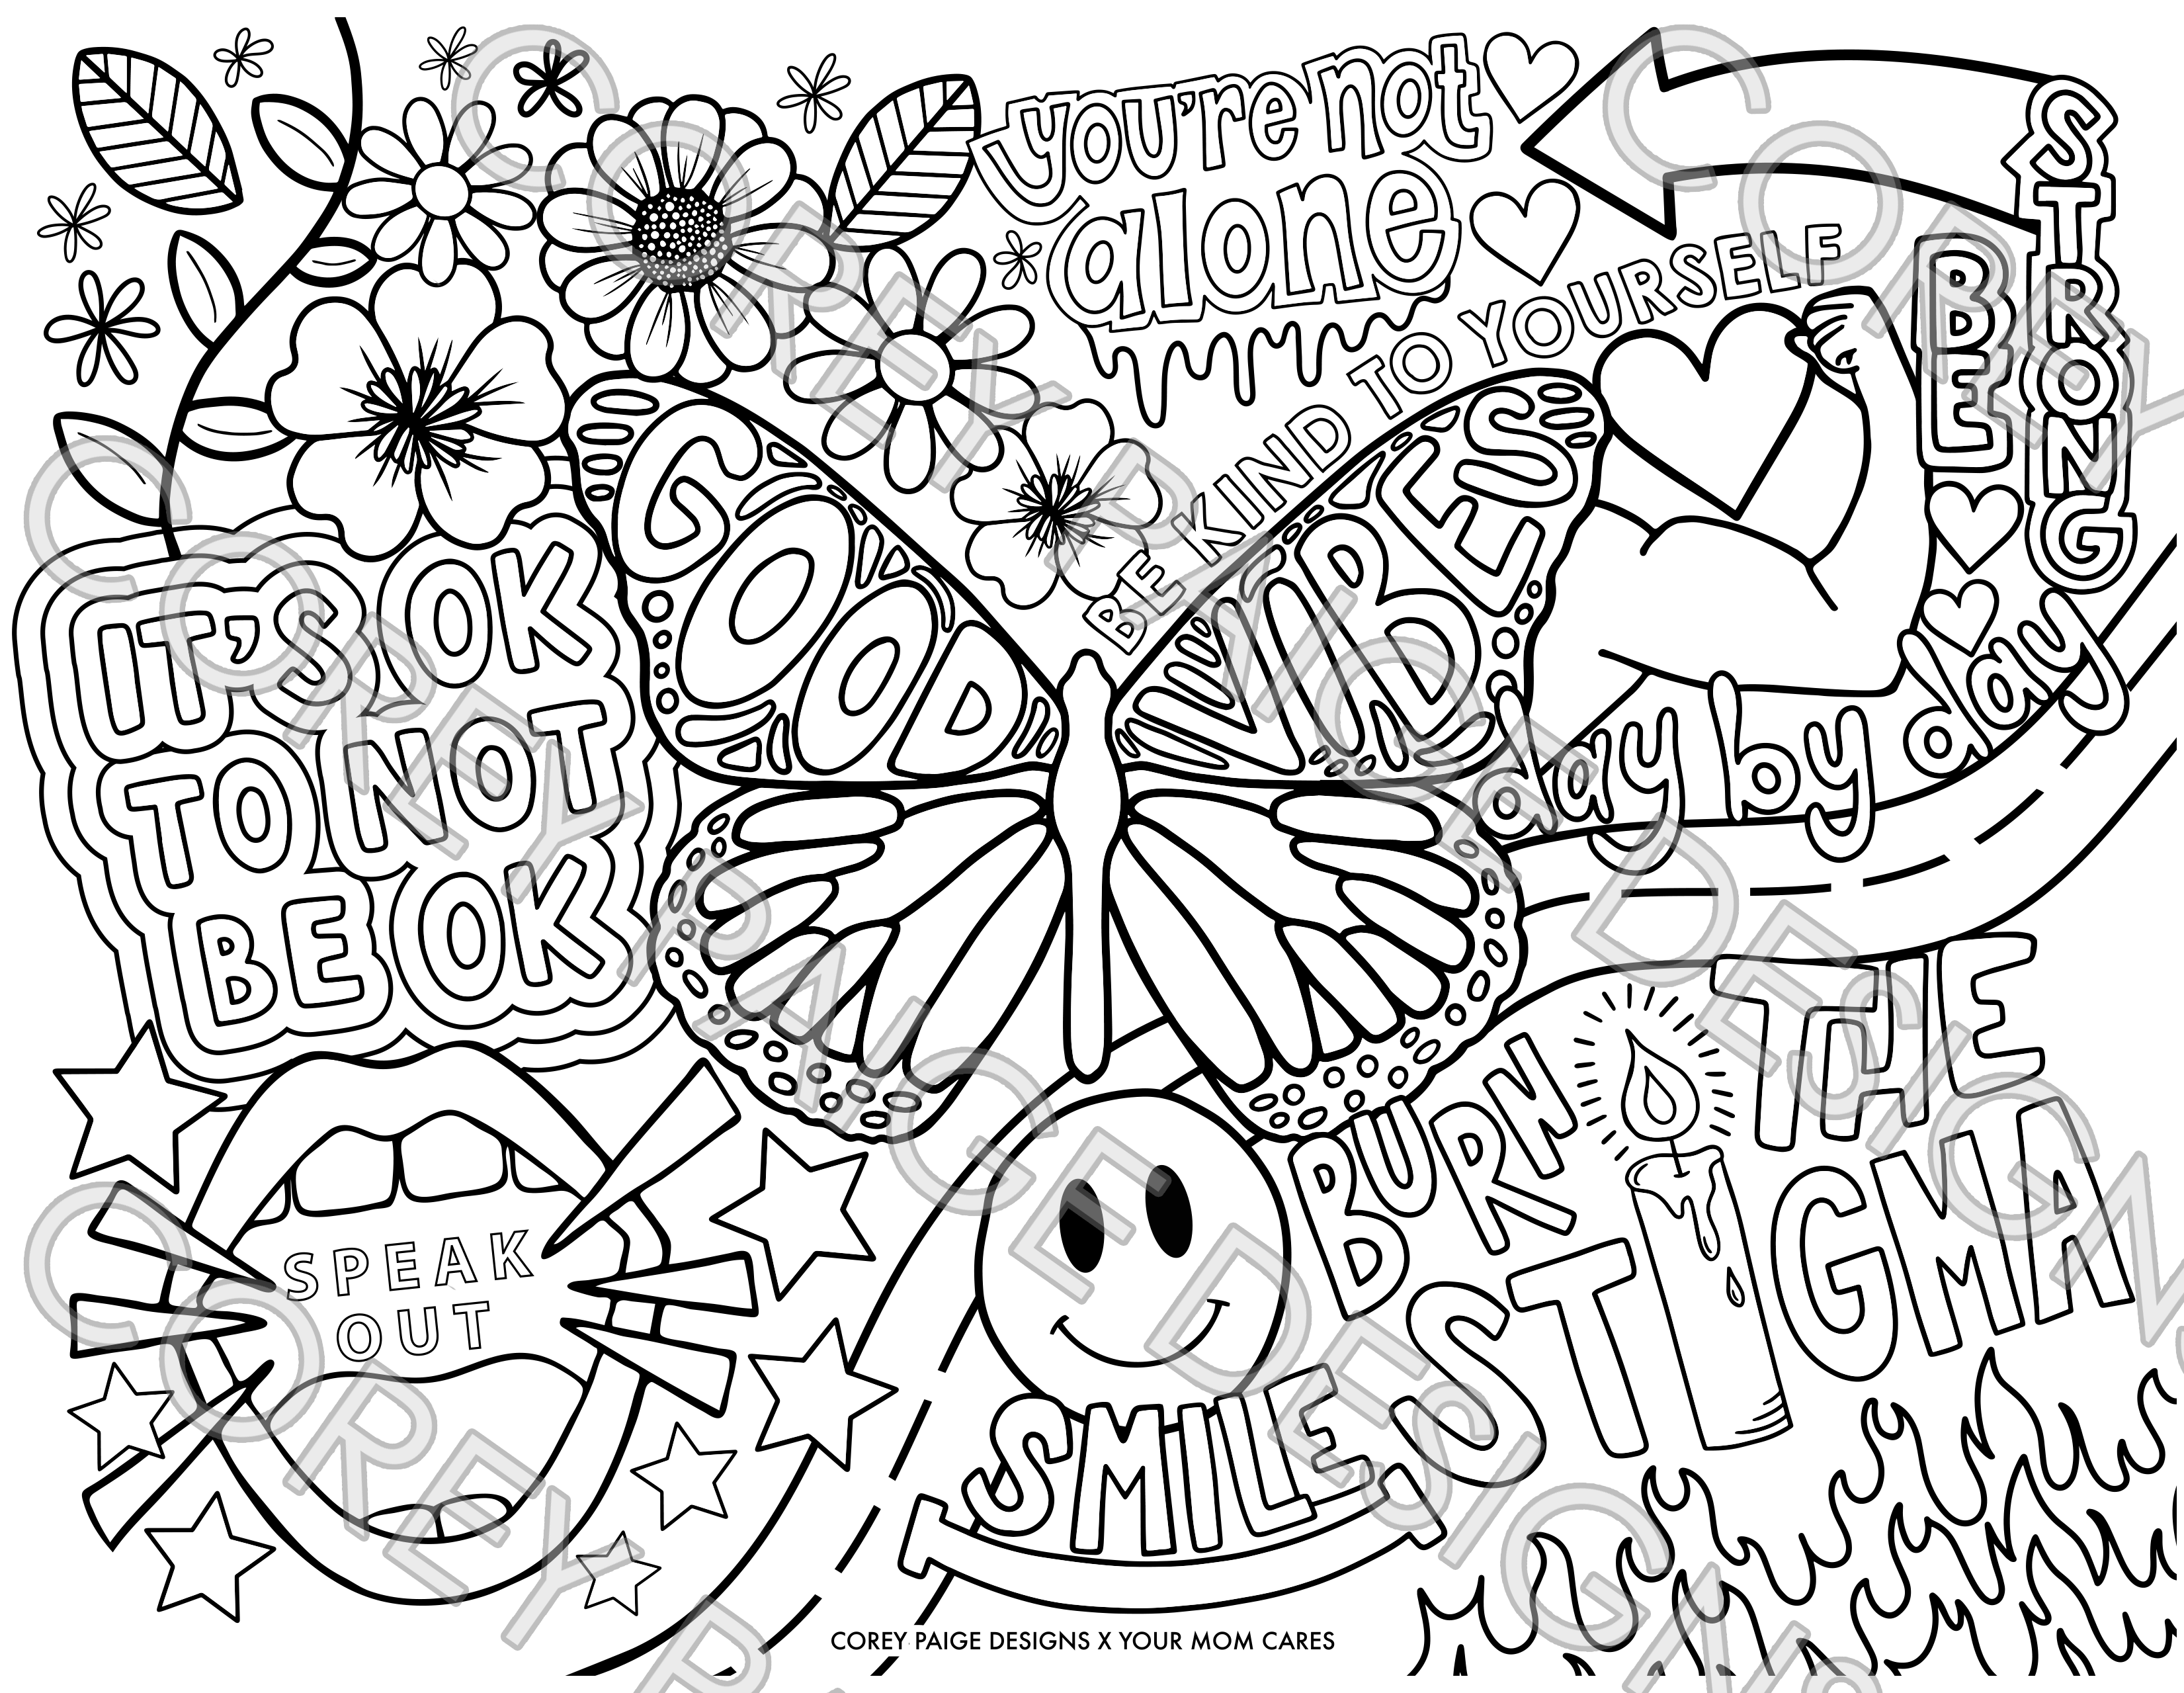 YourMomCares x Corey Paige Designs Coloring Sheet Pack